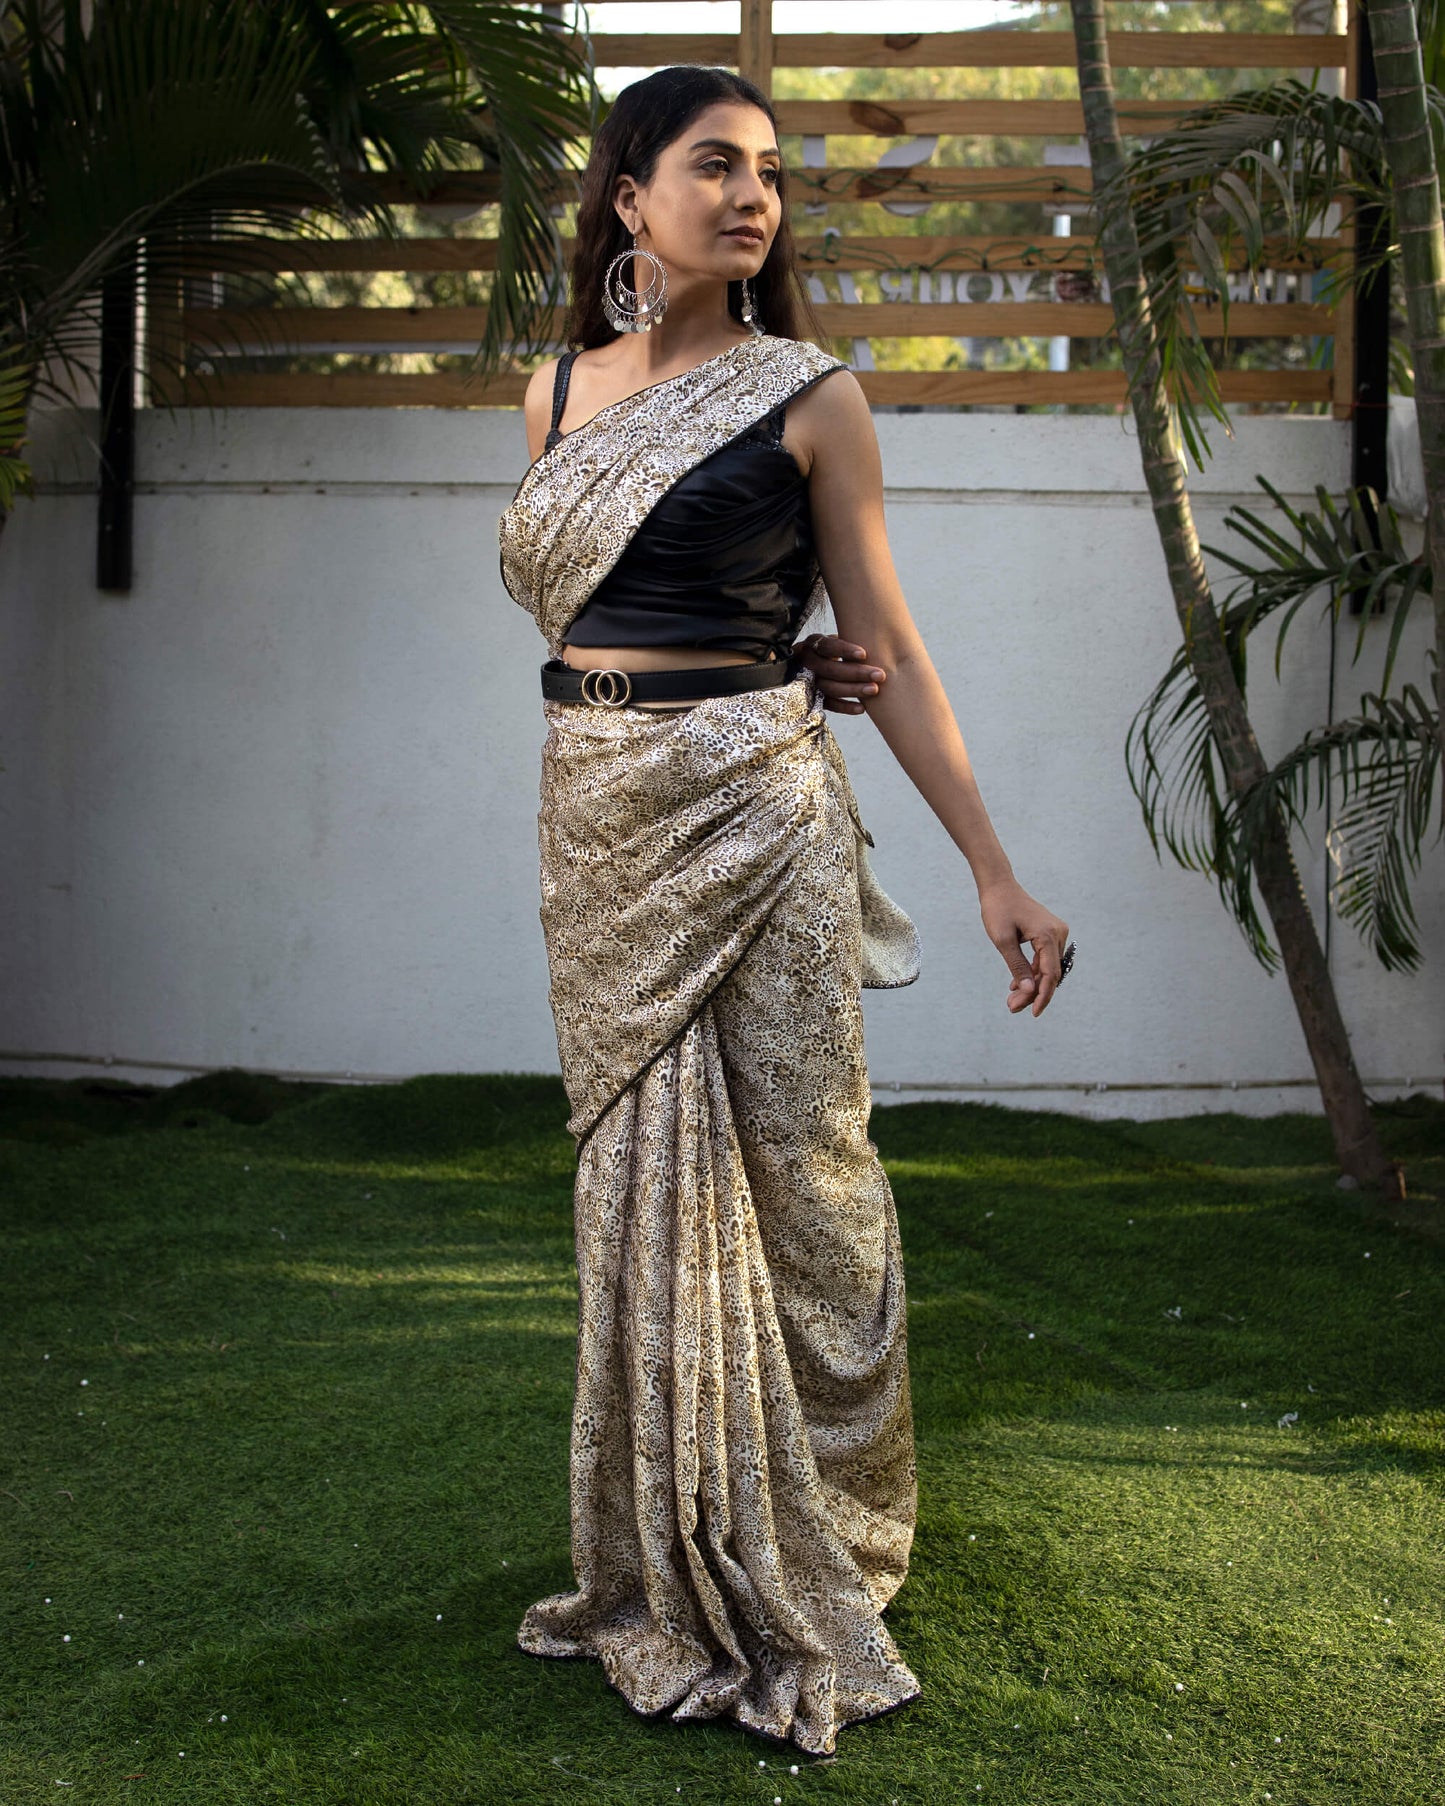 Olive Green And Black Animal Pattern Digital Print Crepe Silk Saree With Lace Border